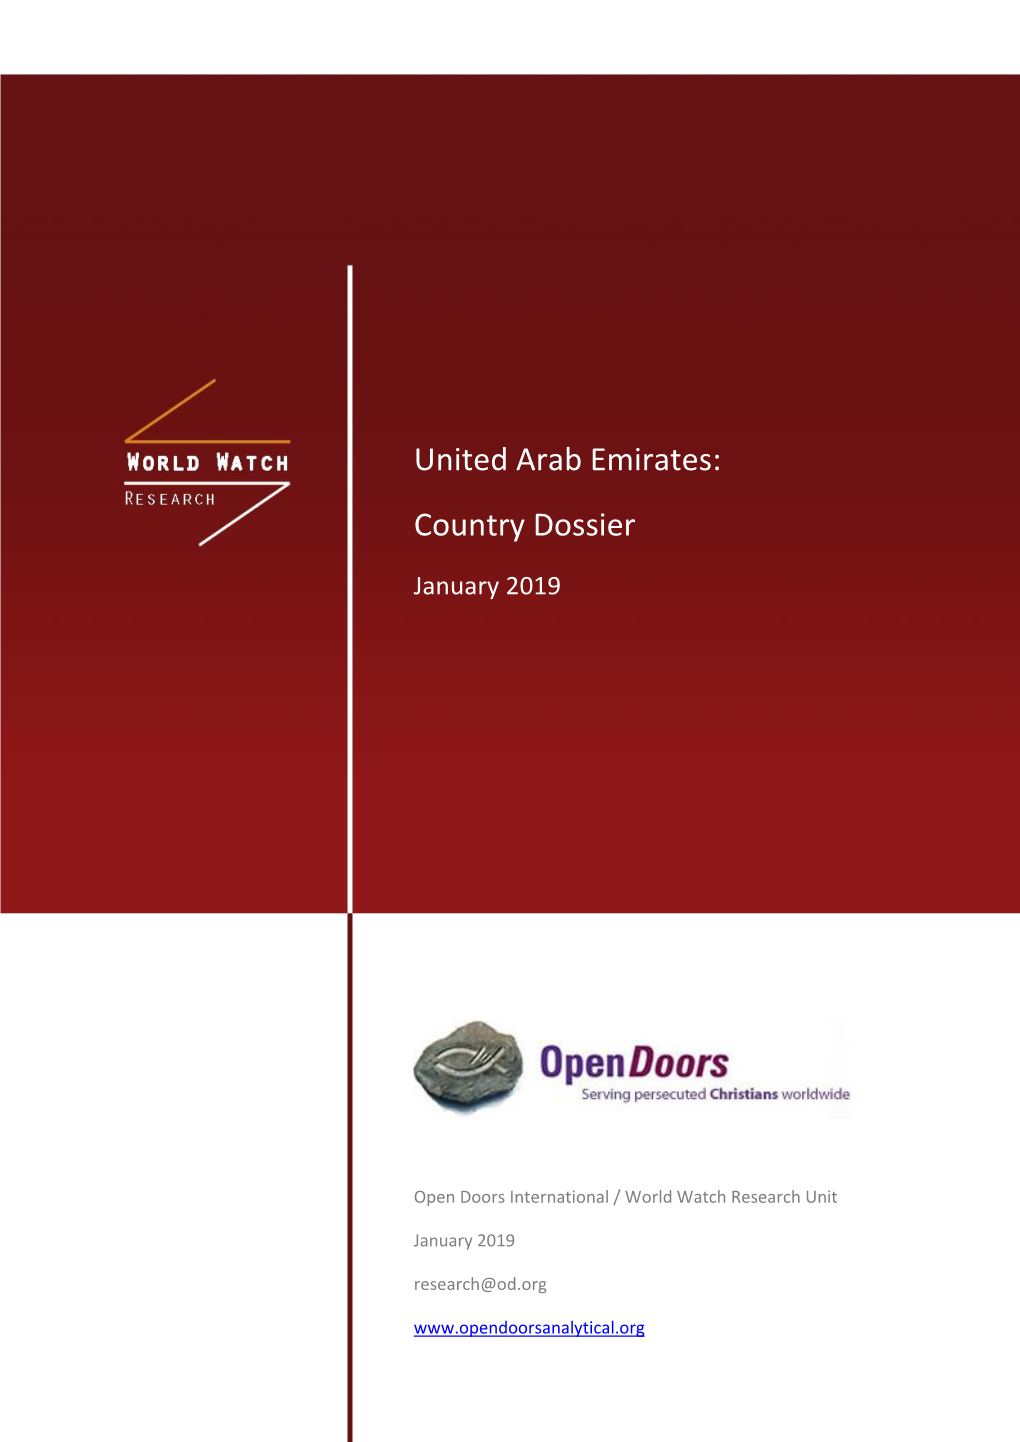 United Arab Emirates: Country Dossier